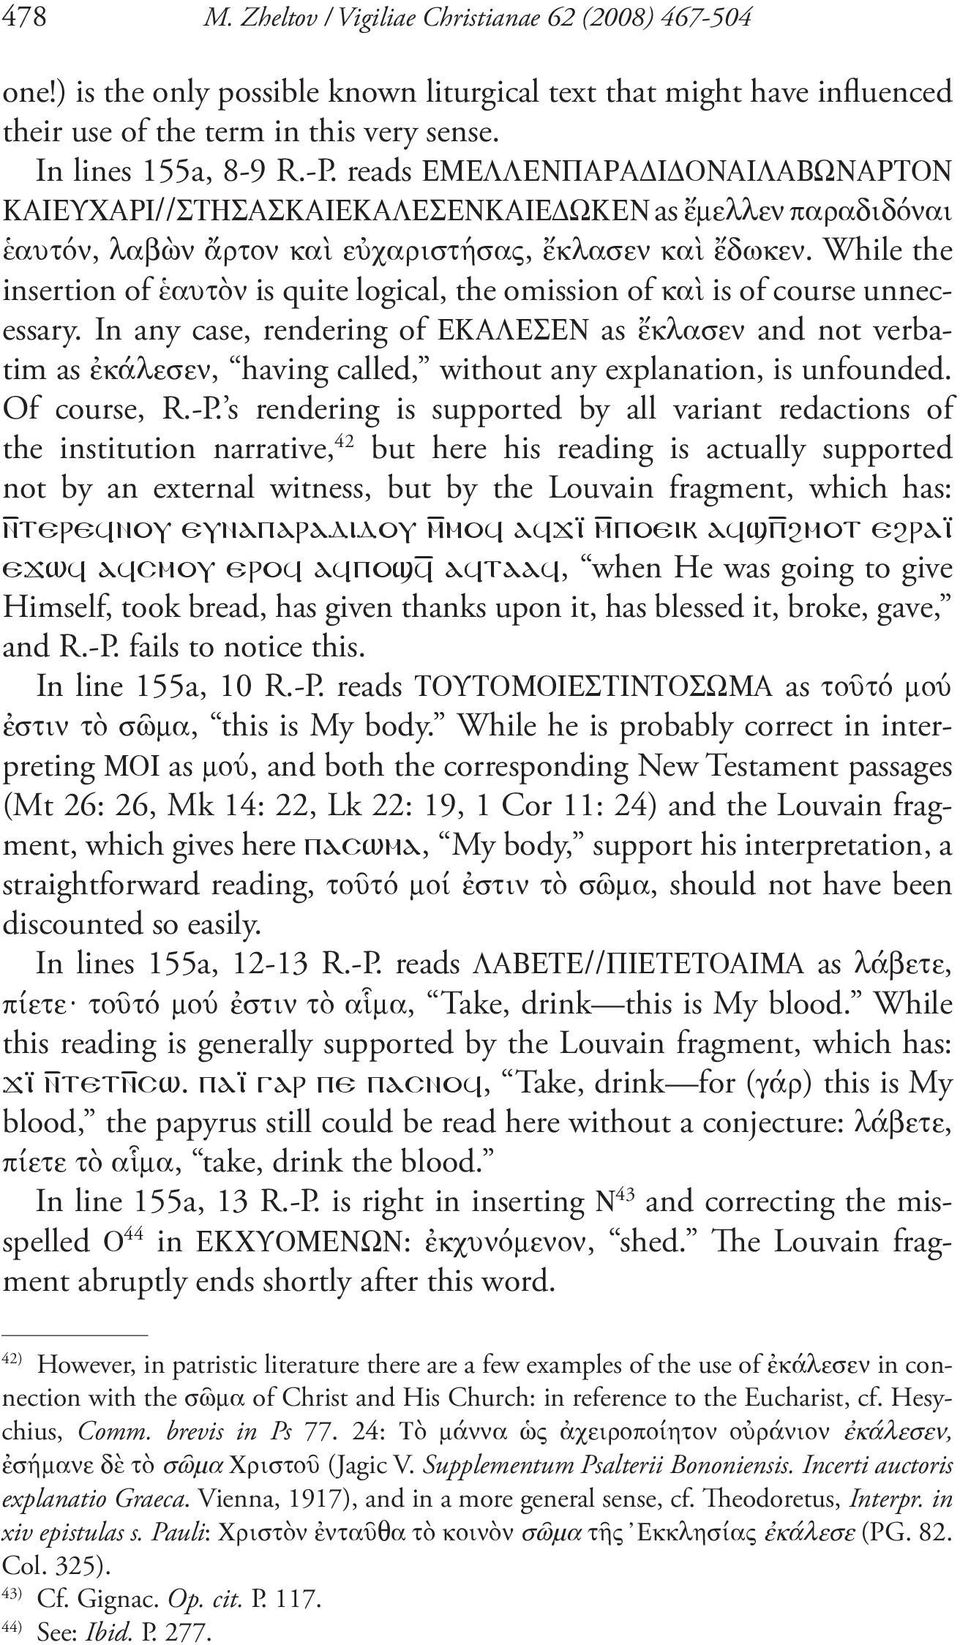 While the insertion of ἑαυτὸν is quite logical, the omission of καὶ is of course unnecessary.